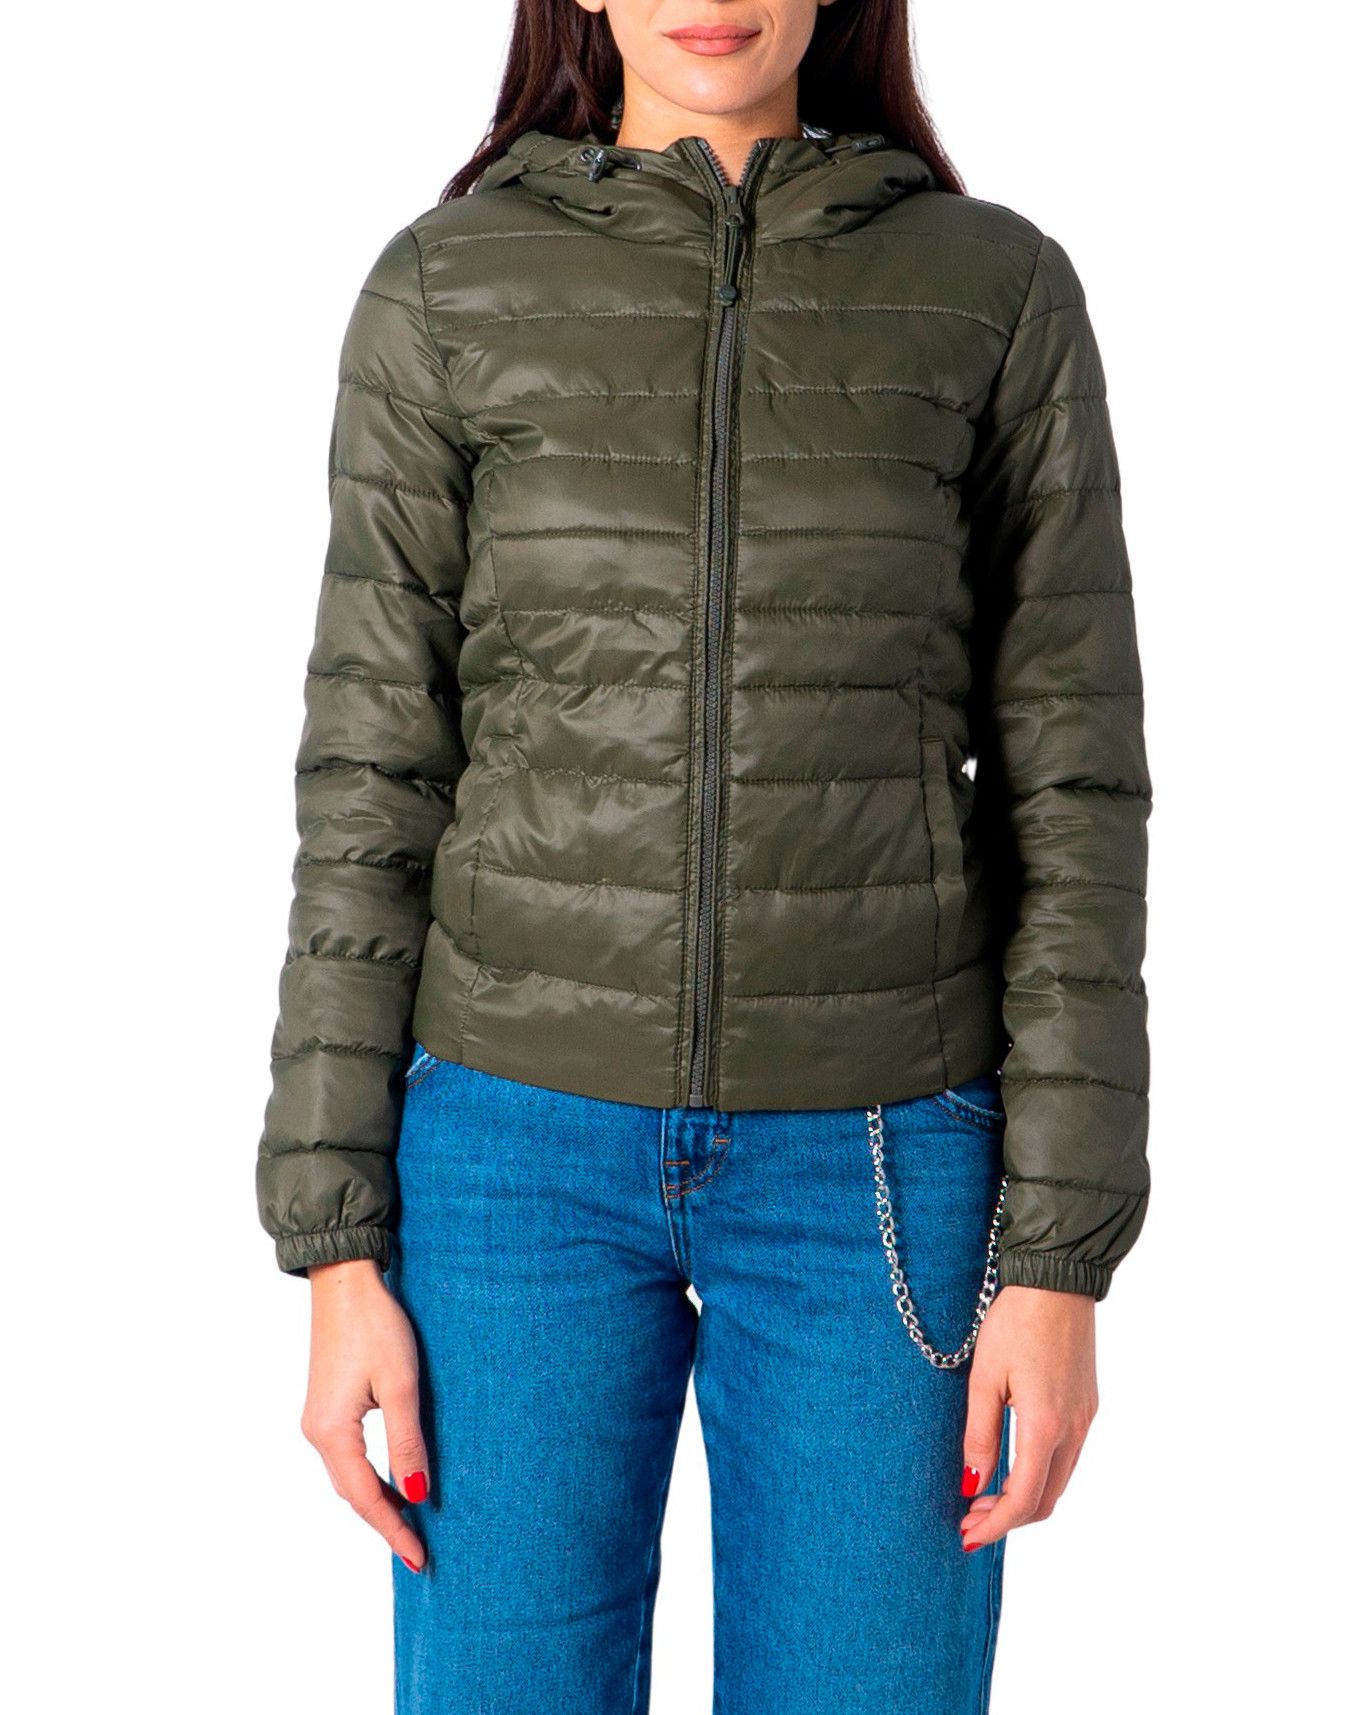 Brand: Only   Gender: Women   Type: Jackets   Color: Green   Sleeves: Long Sleeve   Collar: Hood   Fastening: With Zip   Pockets: Front Pockets   Season: Fall/winter . length:medium. style:zipper. material:nylon. type:bomber. hood:hood